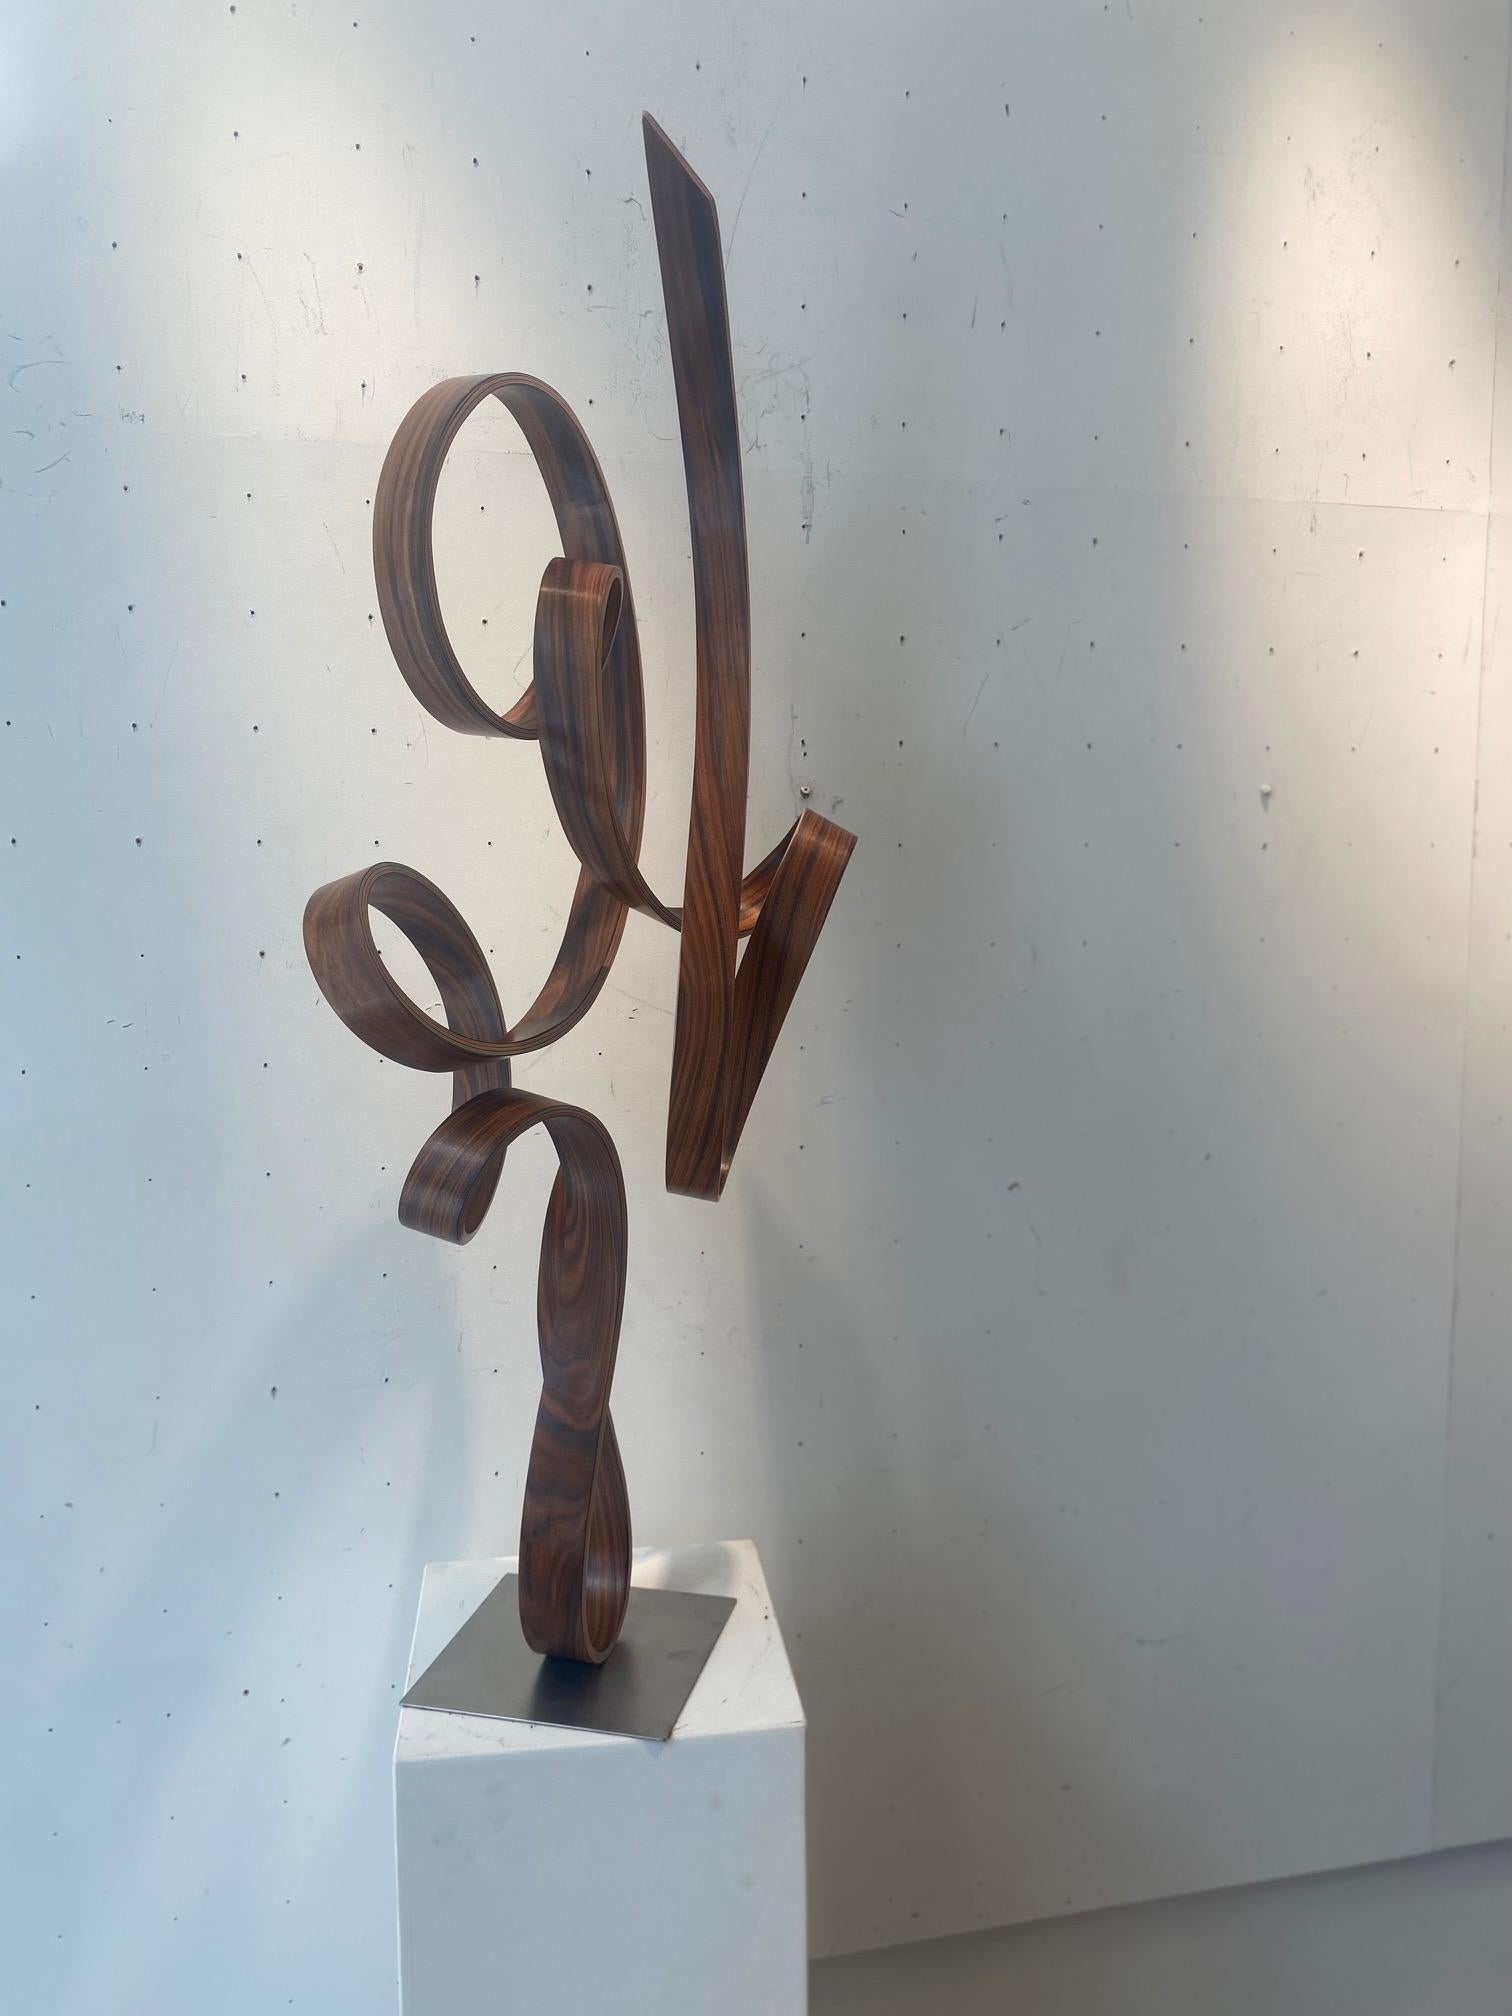 MWT-curvilinear minimalist maple wood sculpture defying gravity by Jacinto Moros 5